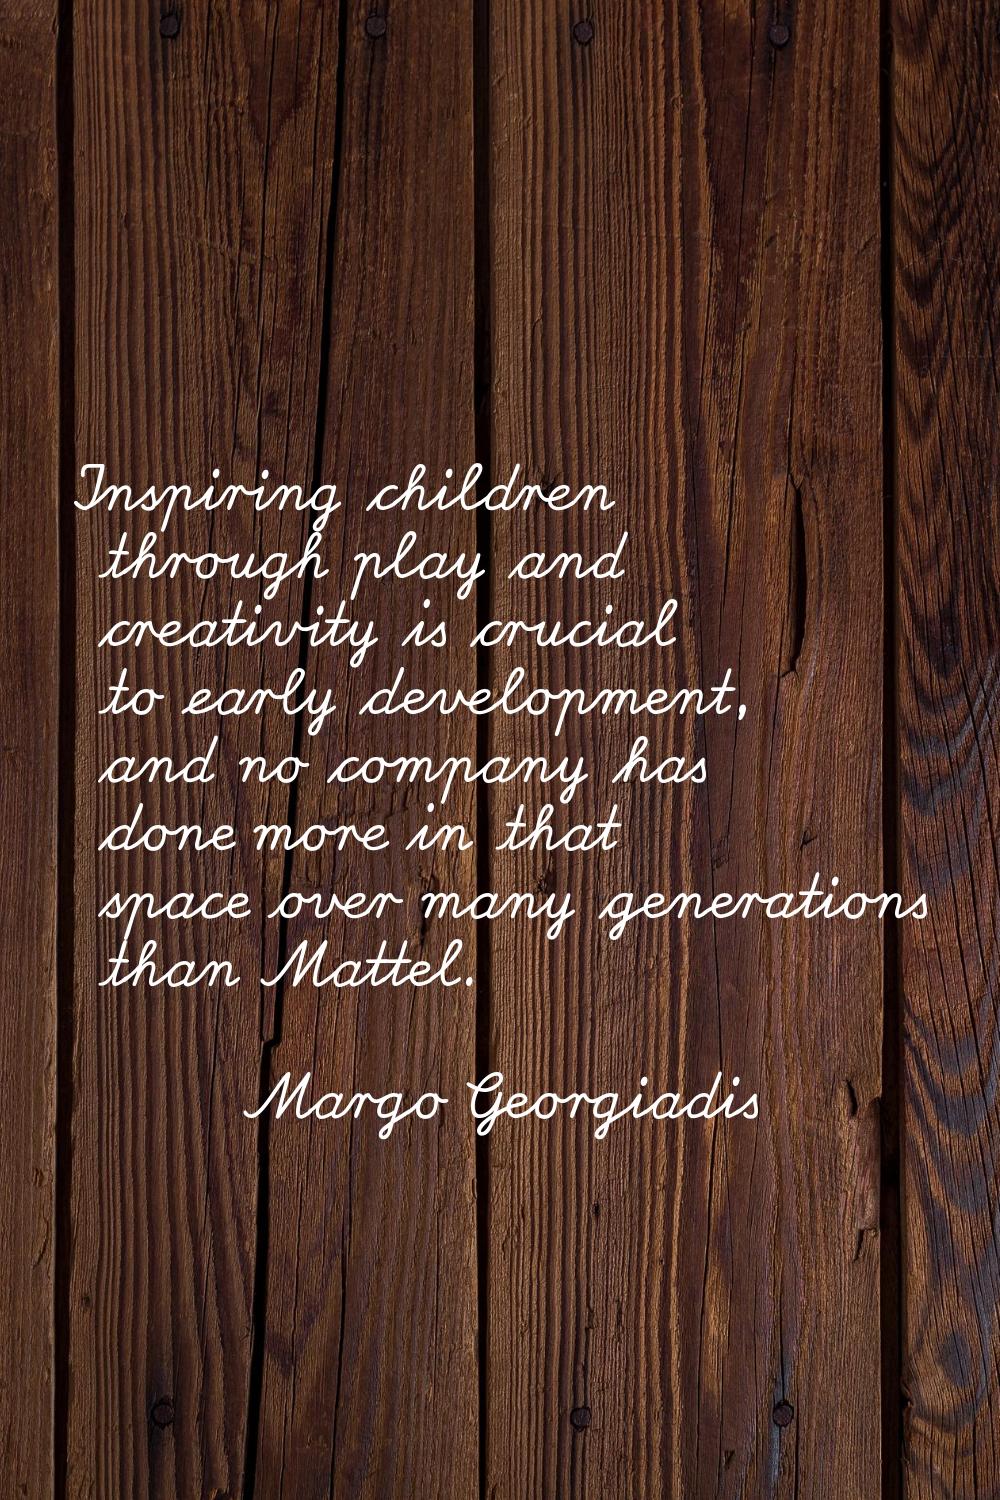 Inspiring children through play and creativity is crucial to early development, and no company has 